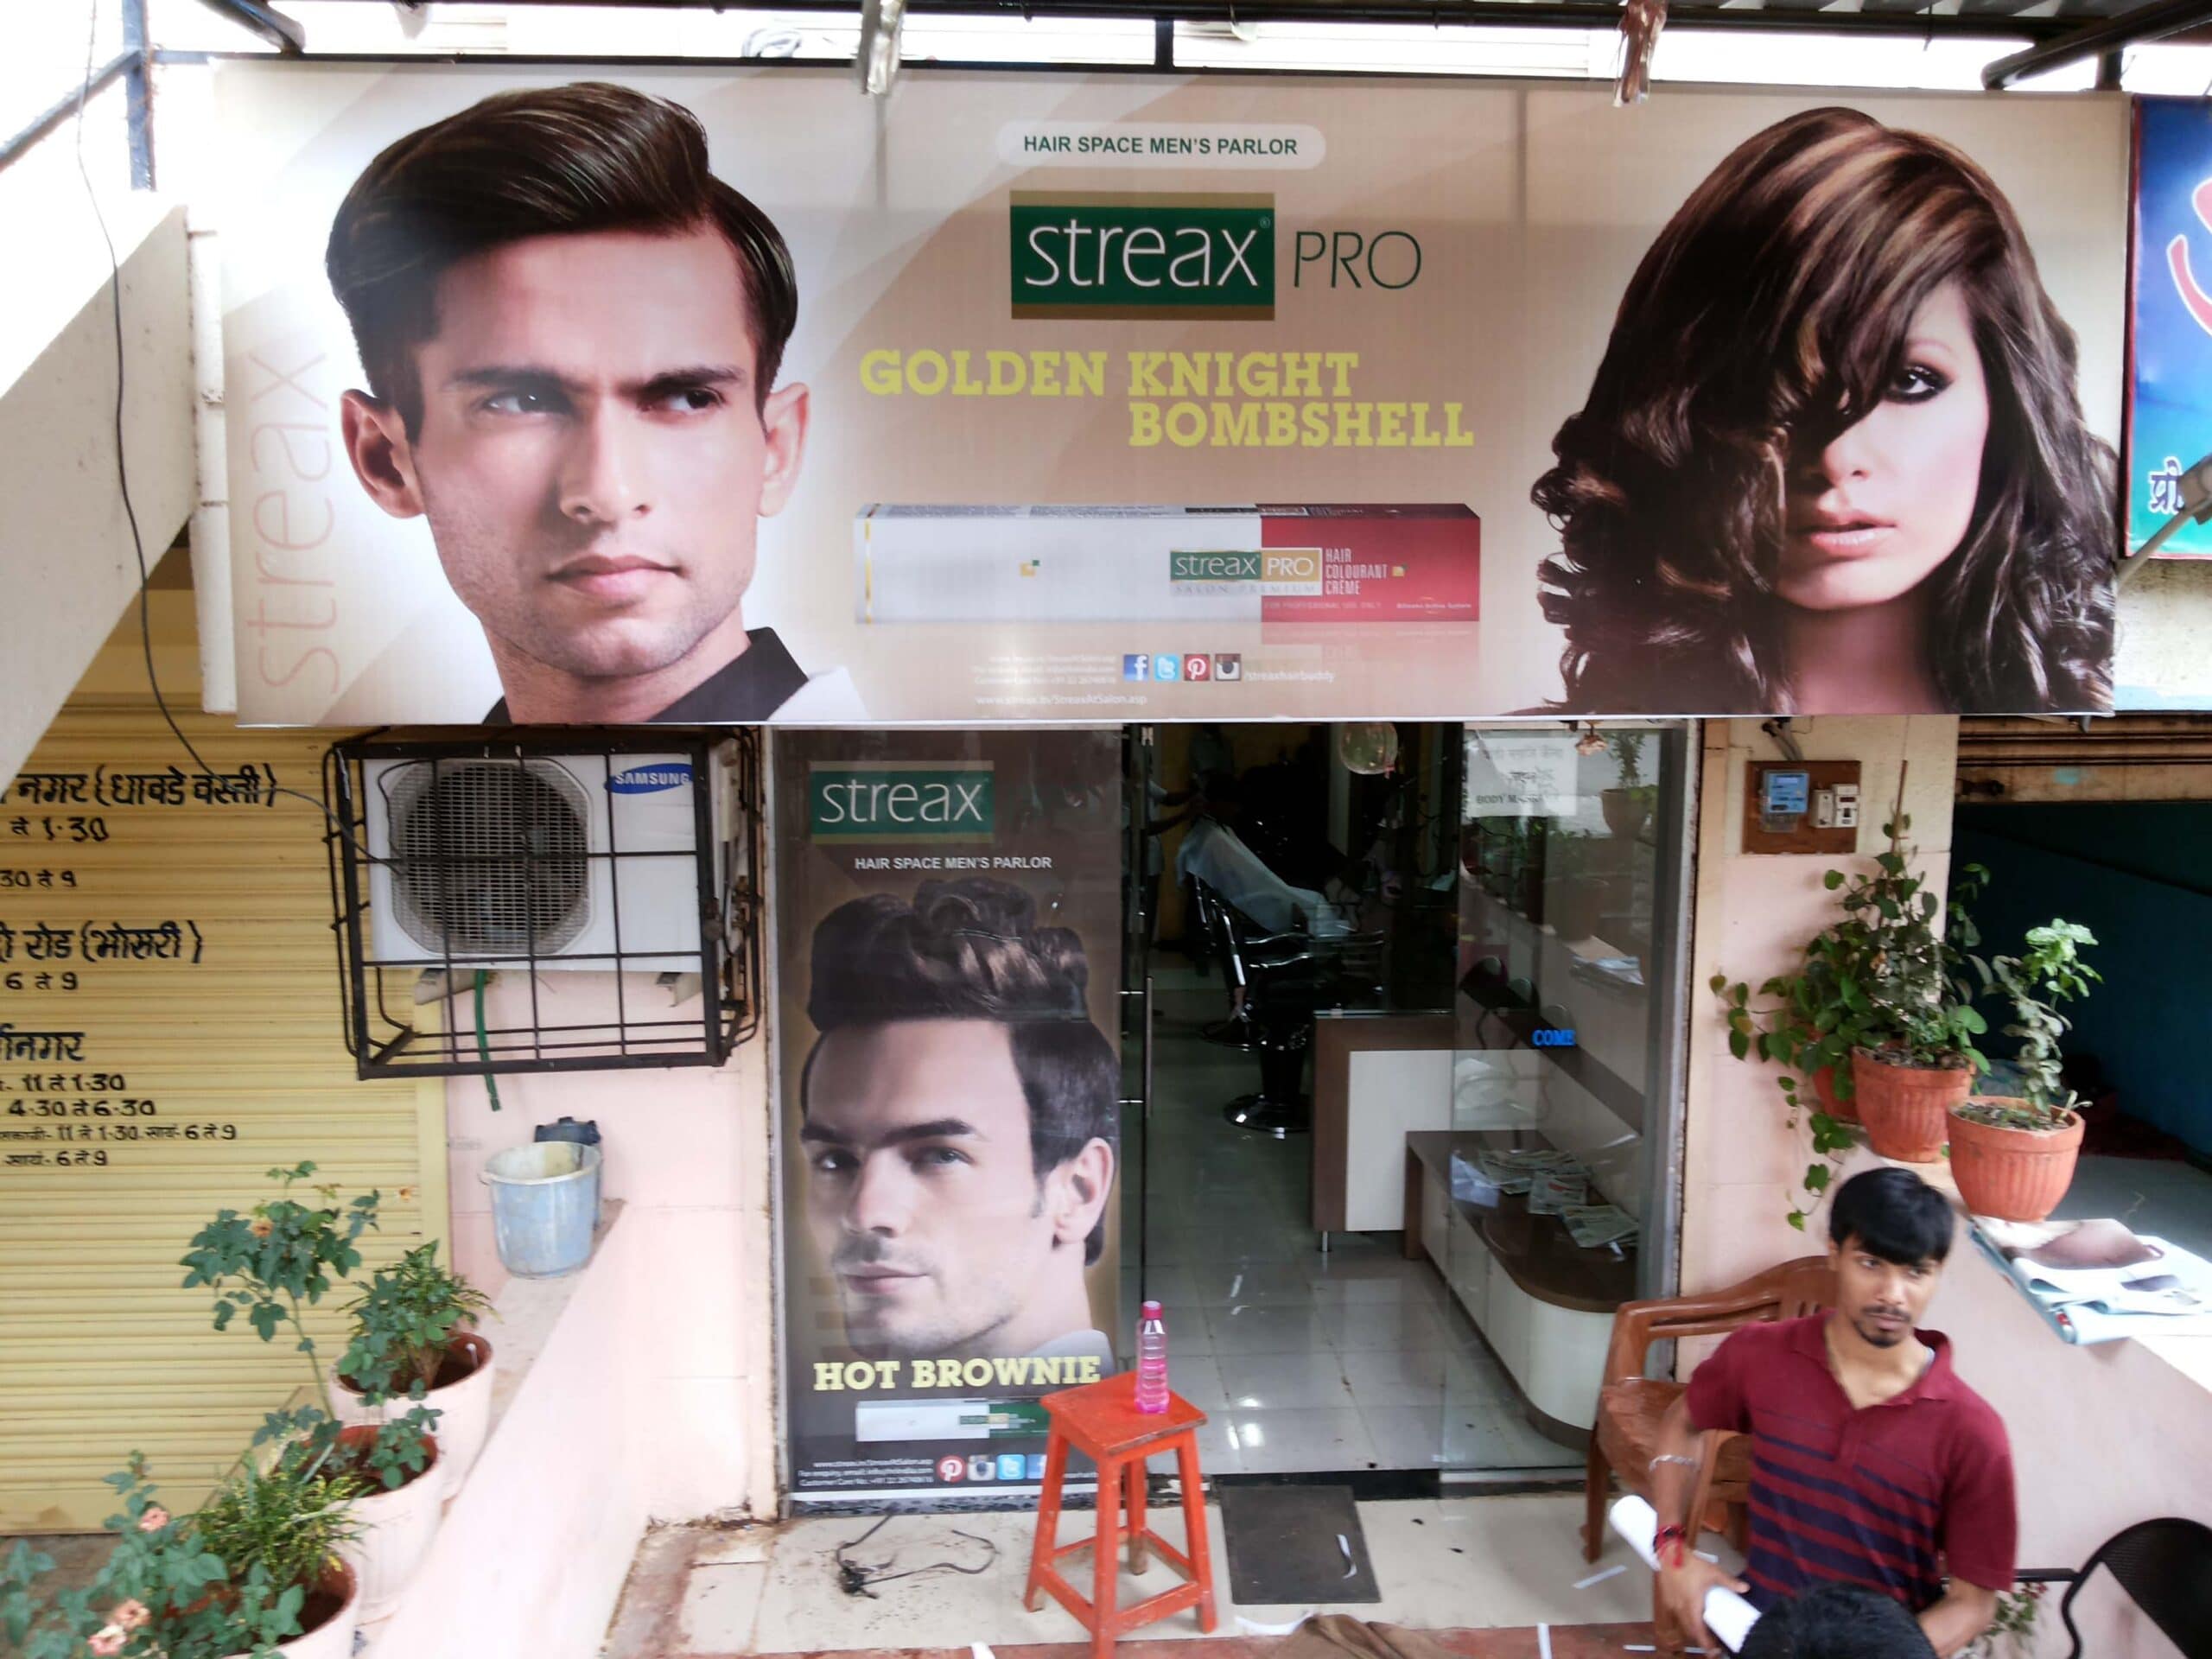 Front lit shop board and glass film prints used for product advertising at the Streax beauty saloon